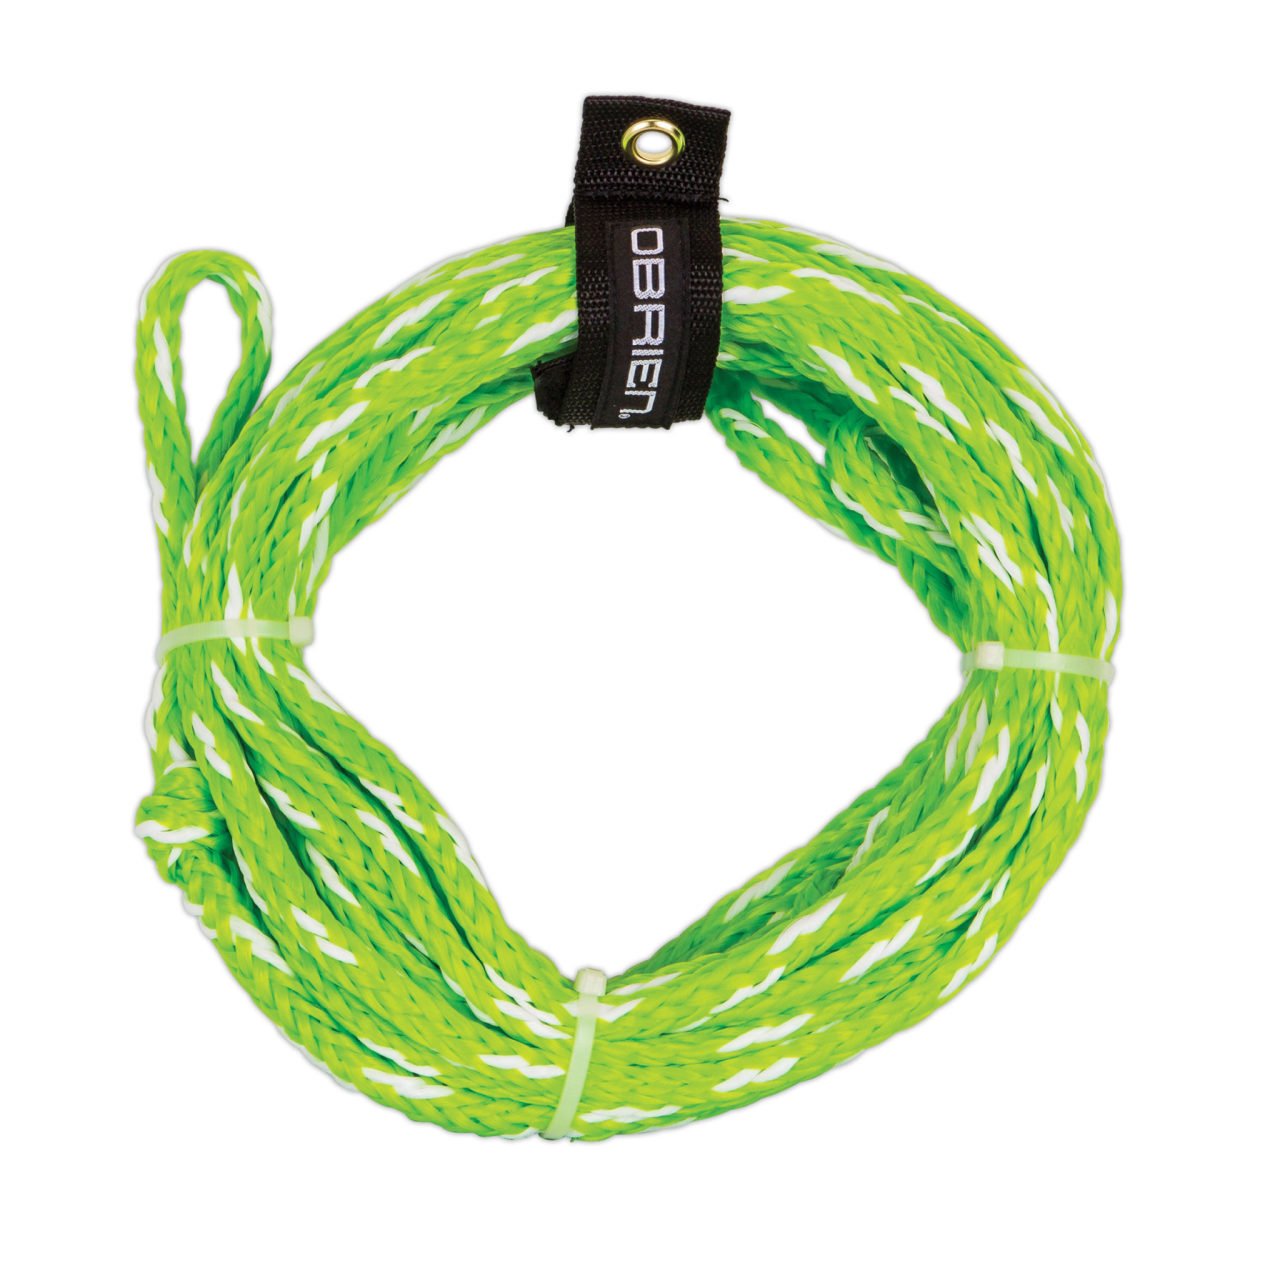 OBRIEN 4-PERSON TUBE ROPE